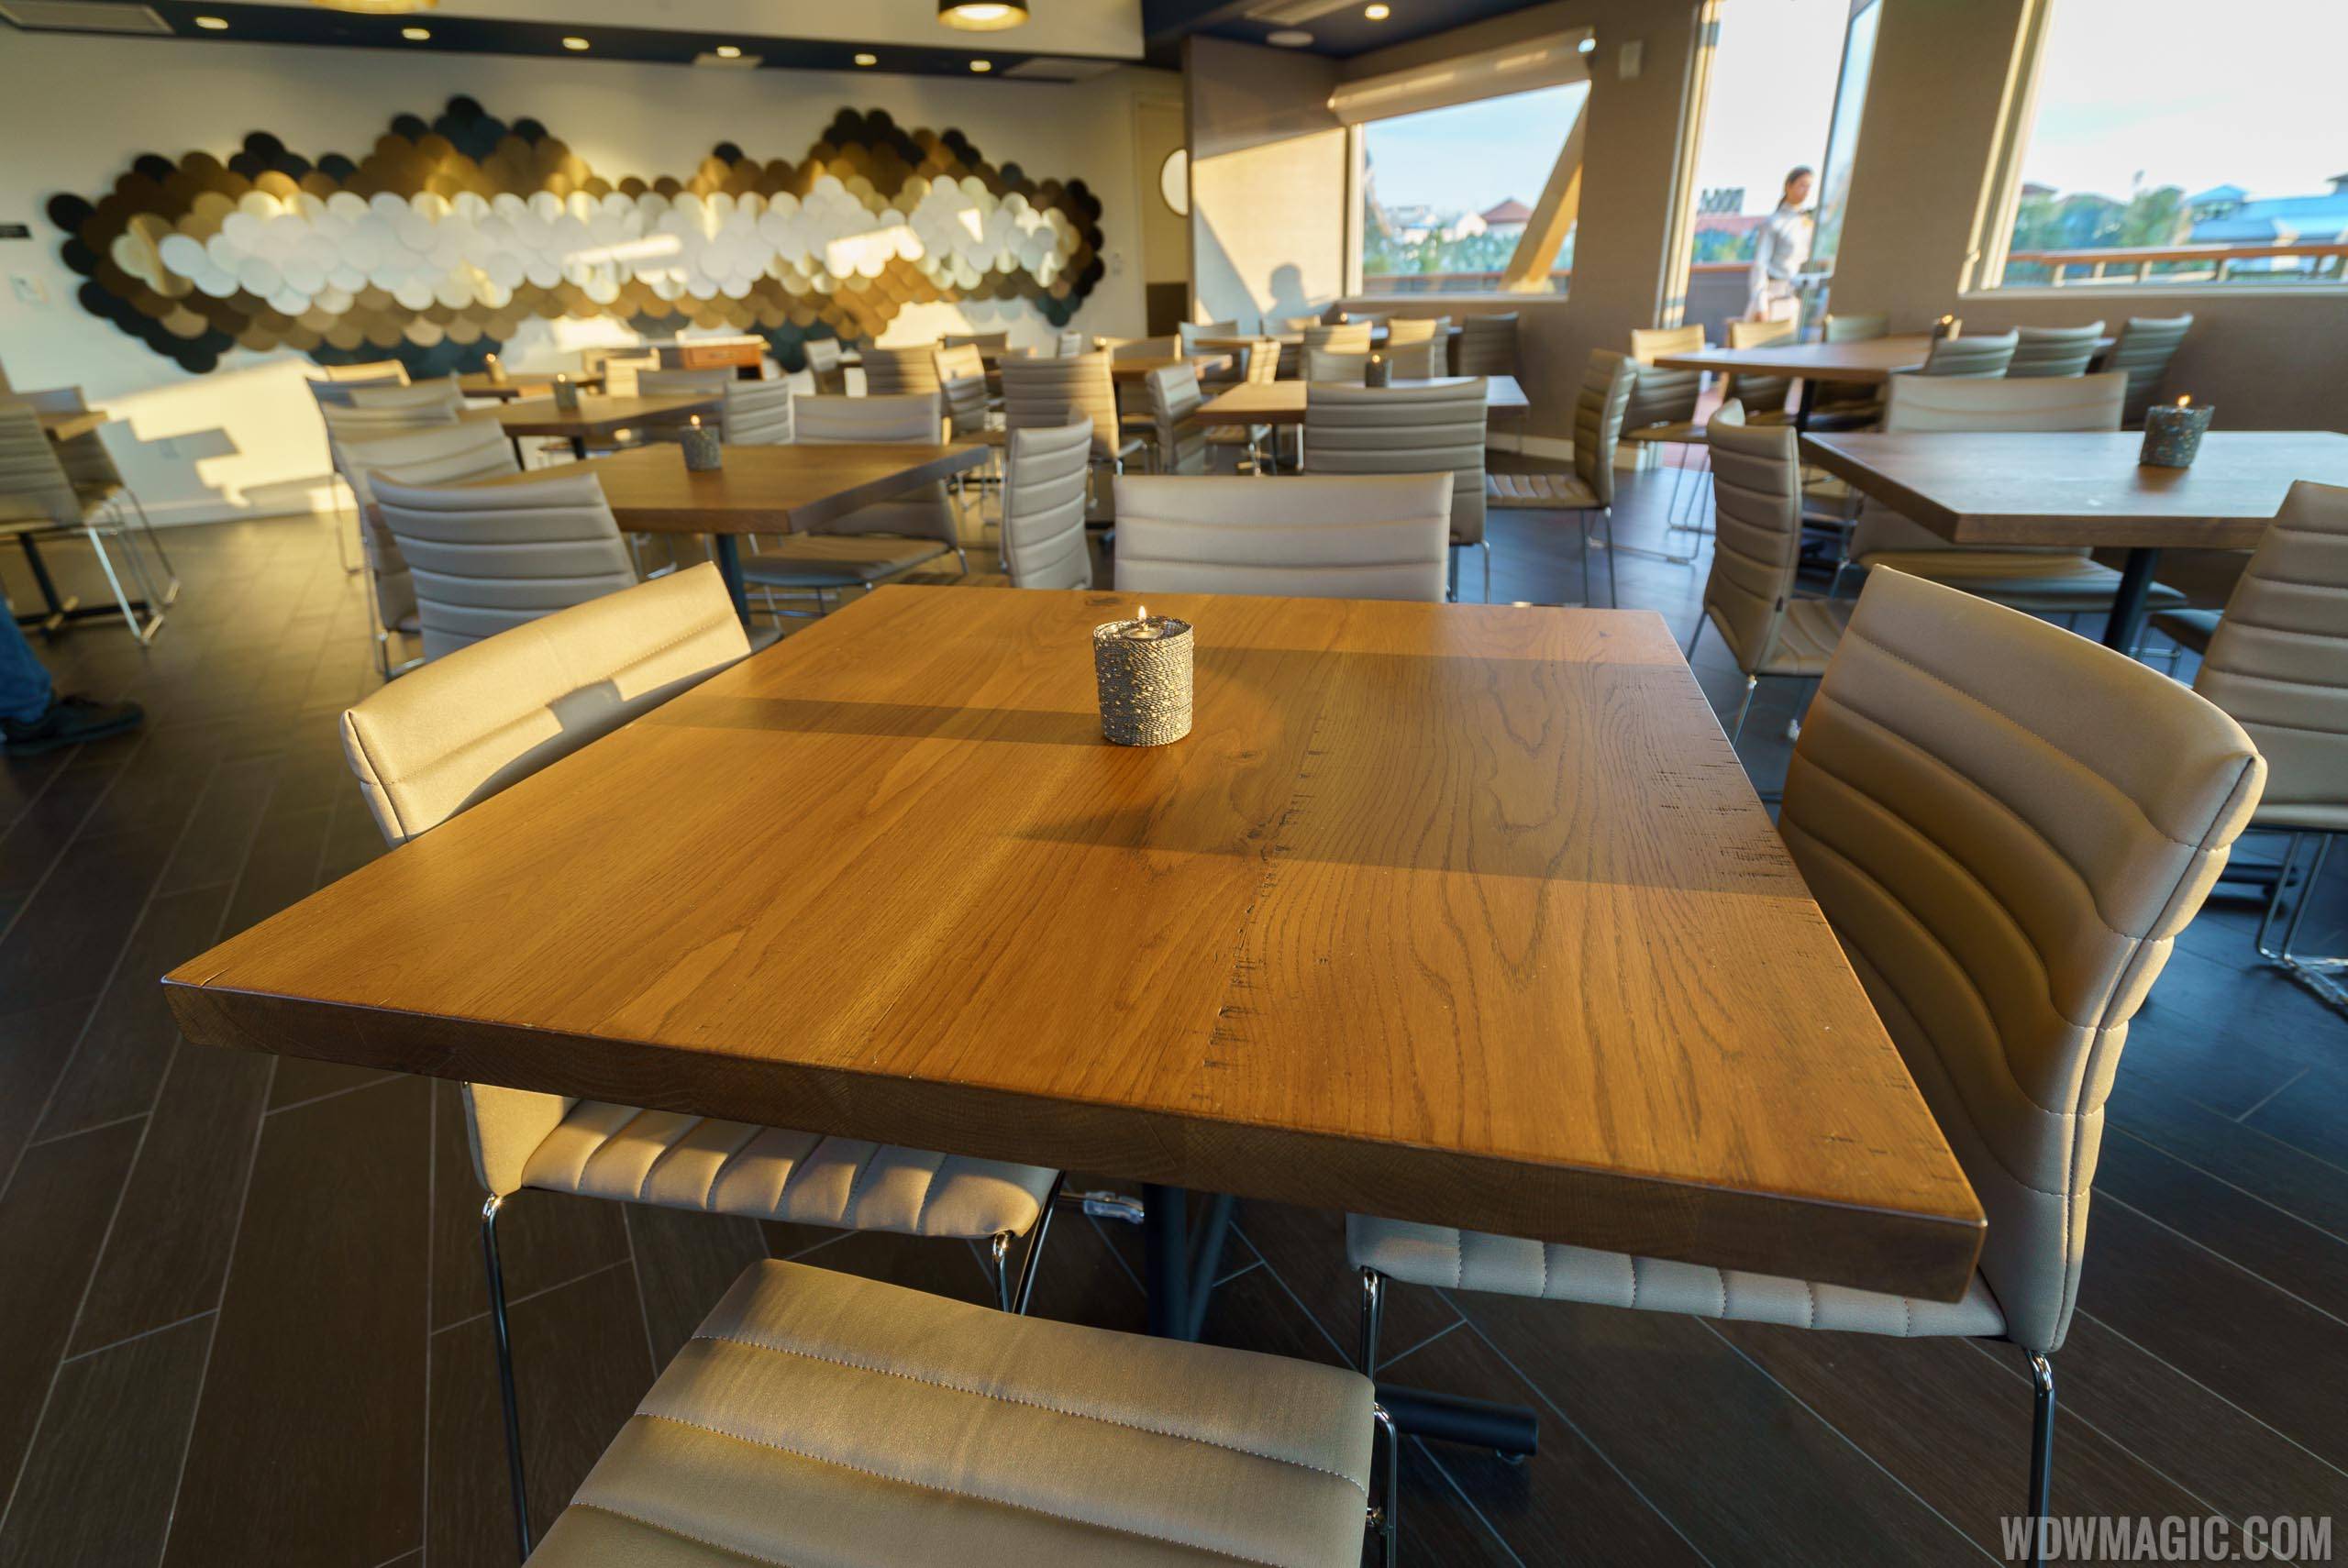 Paddlefish - Top deck private dining event space